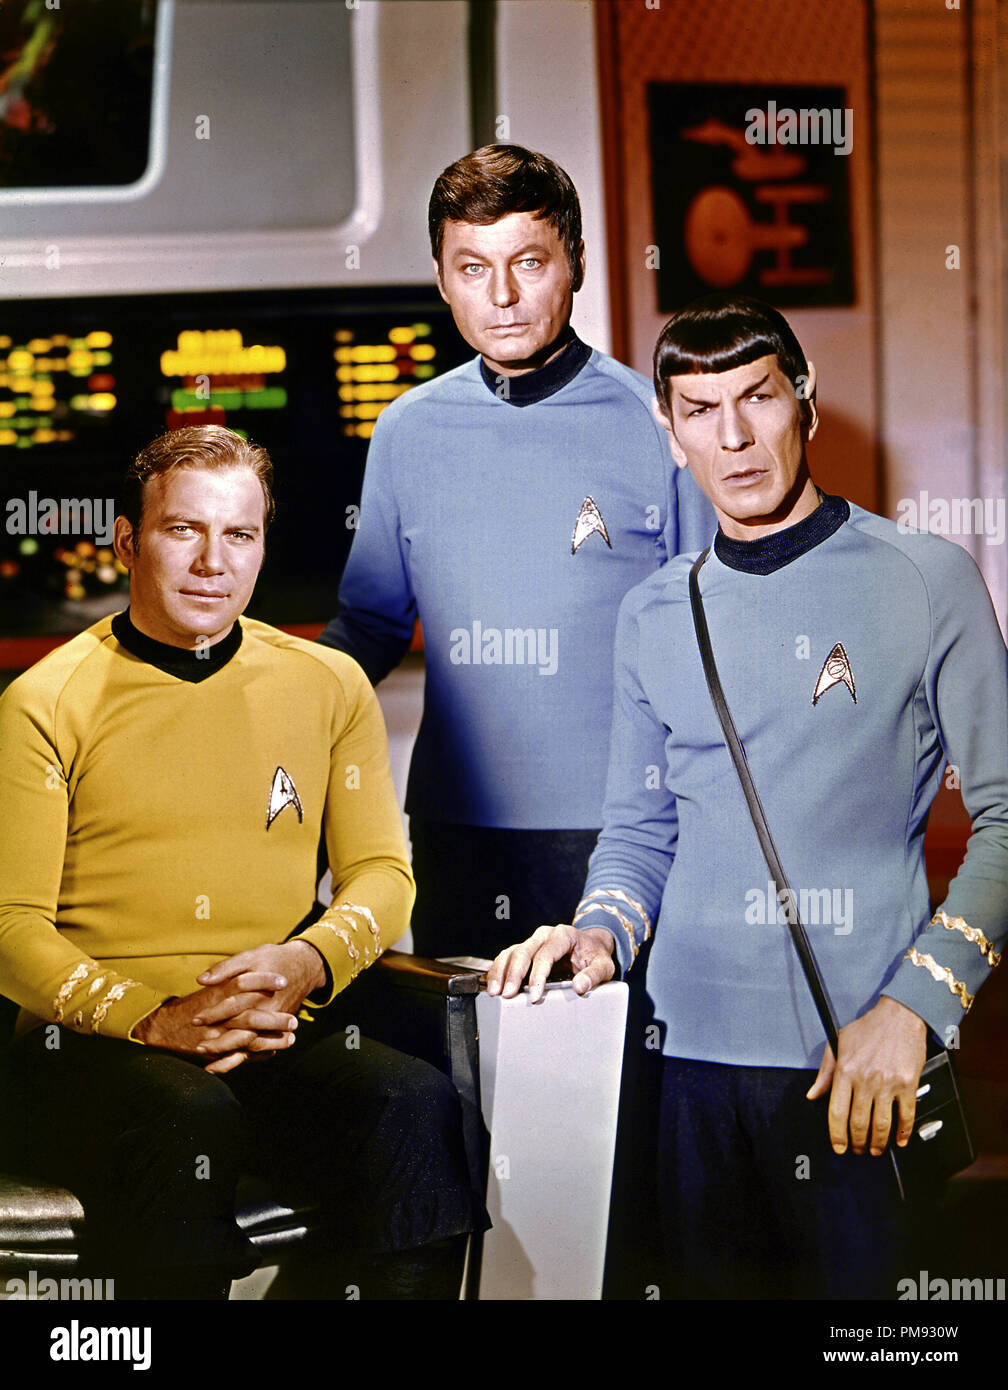 Publicity photo of 'Star Trek' William Shatner, DeForest Kelley and Leonard Nimoy, circa 1966    File Reference # 31537 371THA Stock Photo